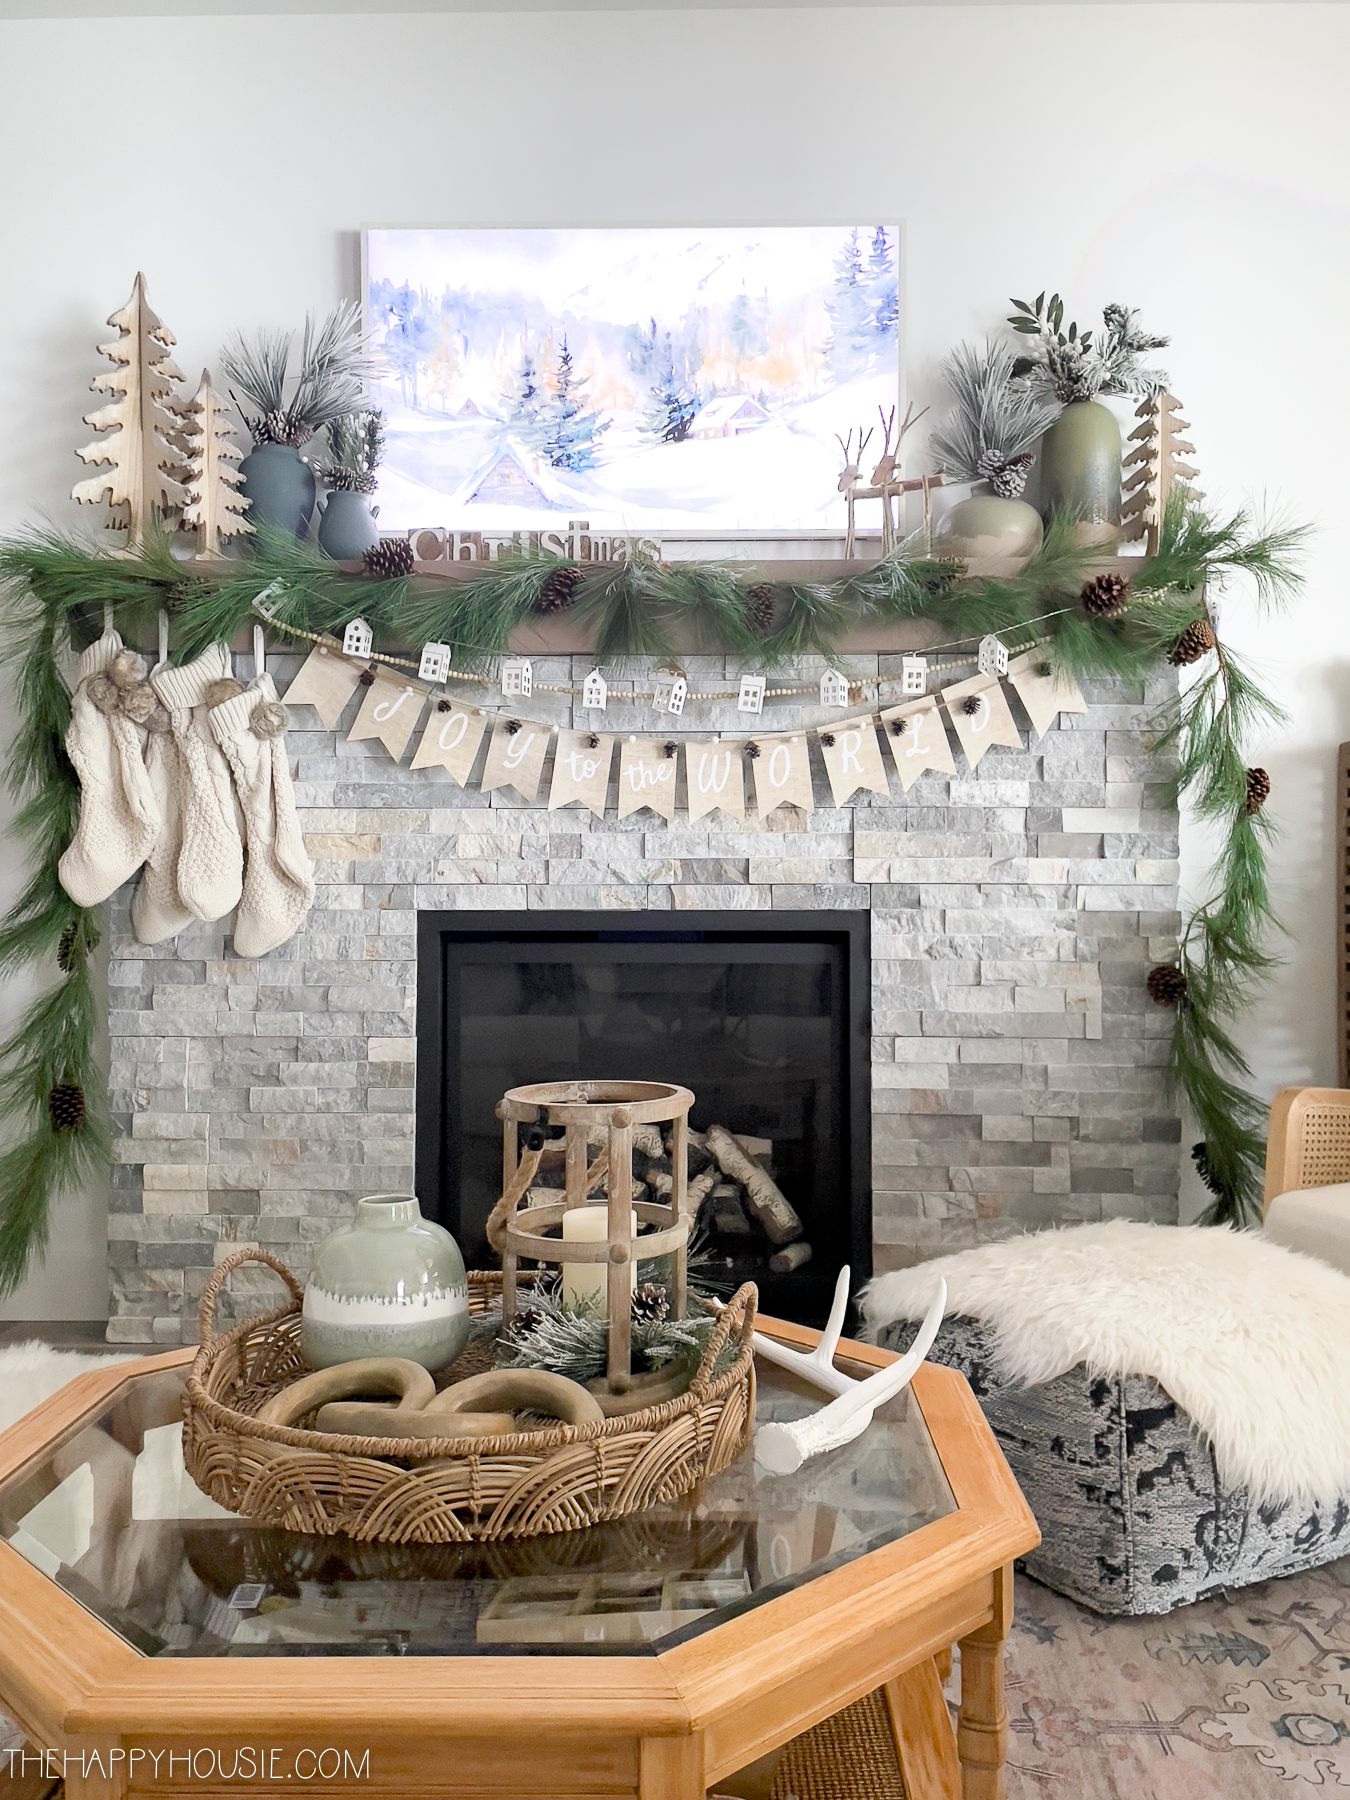 A beautiful vignette on the fireplace mantel includes a picture and an evergreen garland.